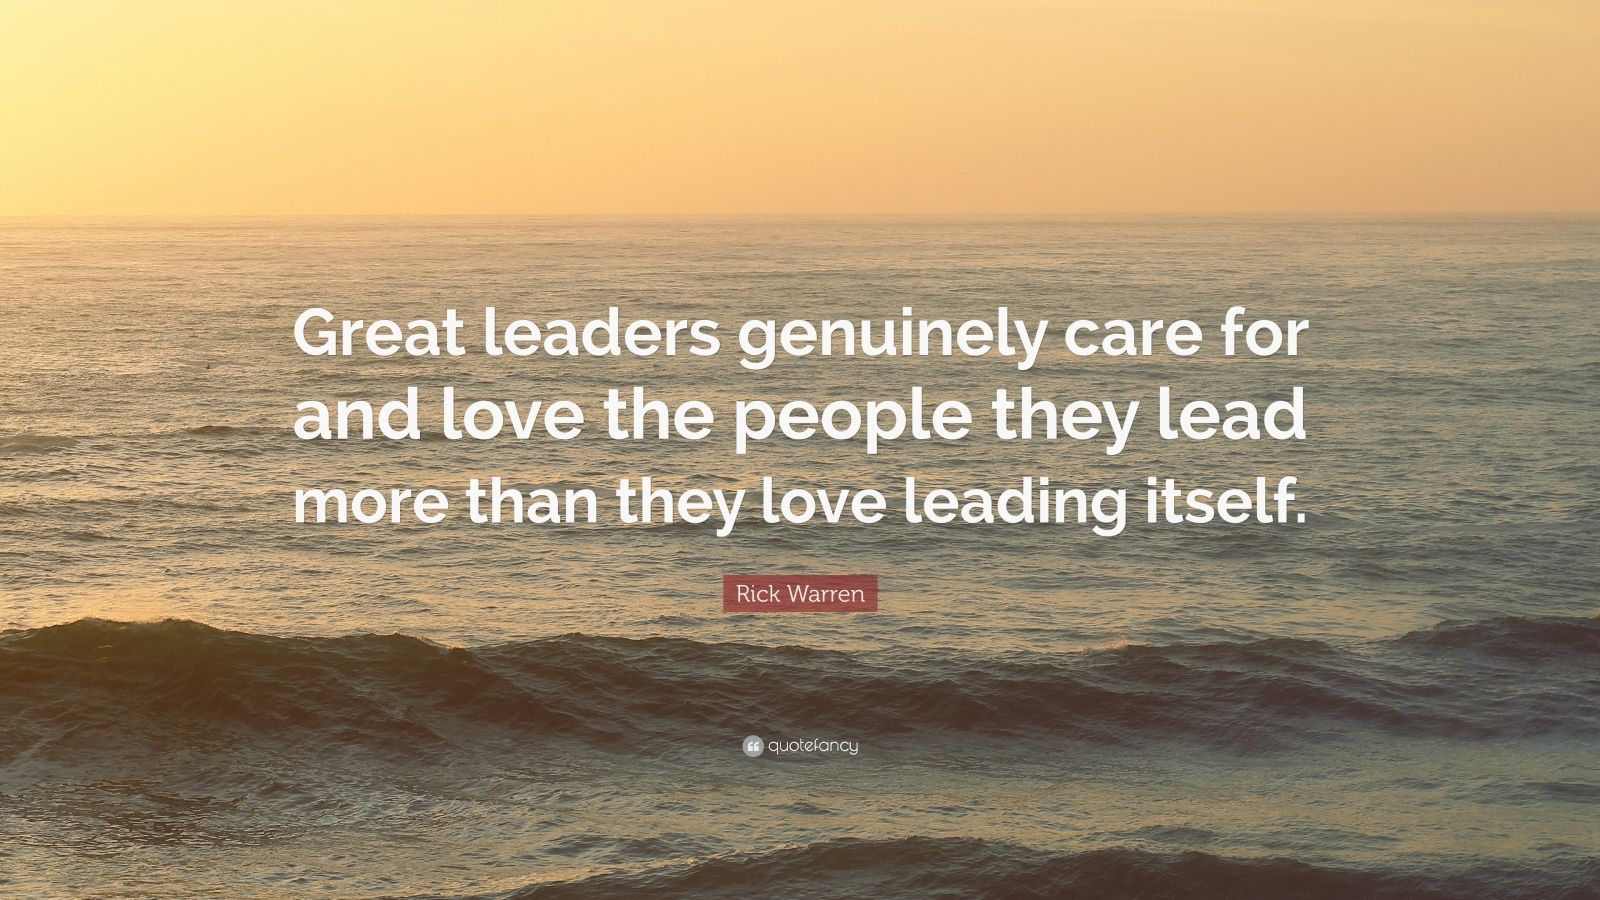 Rick Warren Quote: “Great leaders genuinely care for and love the